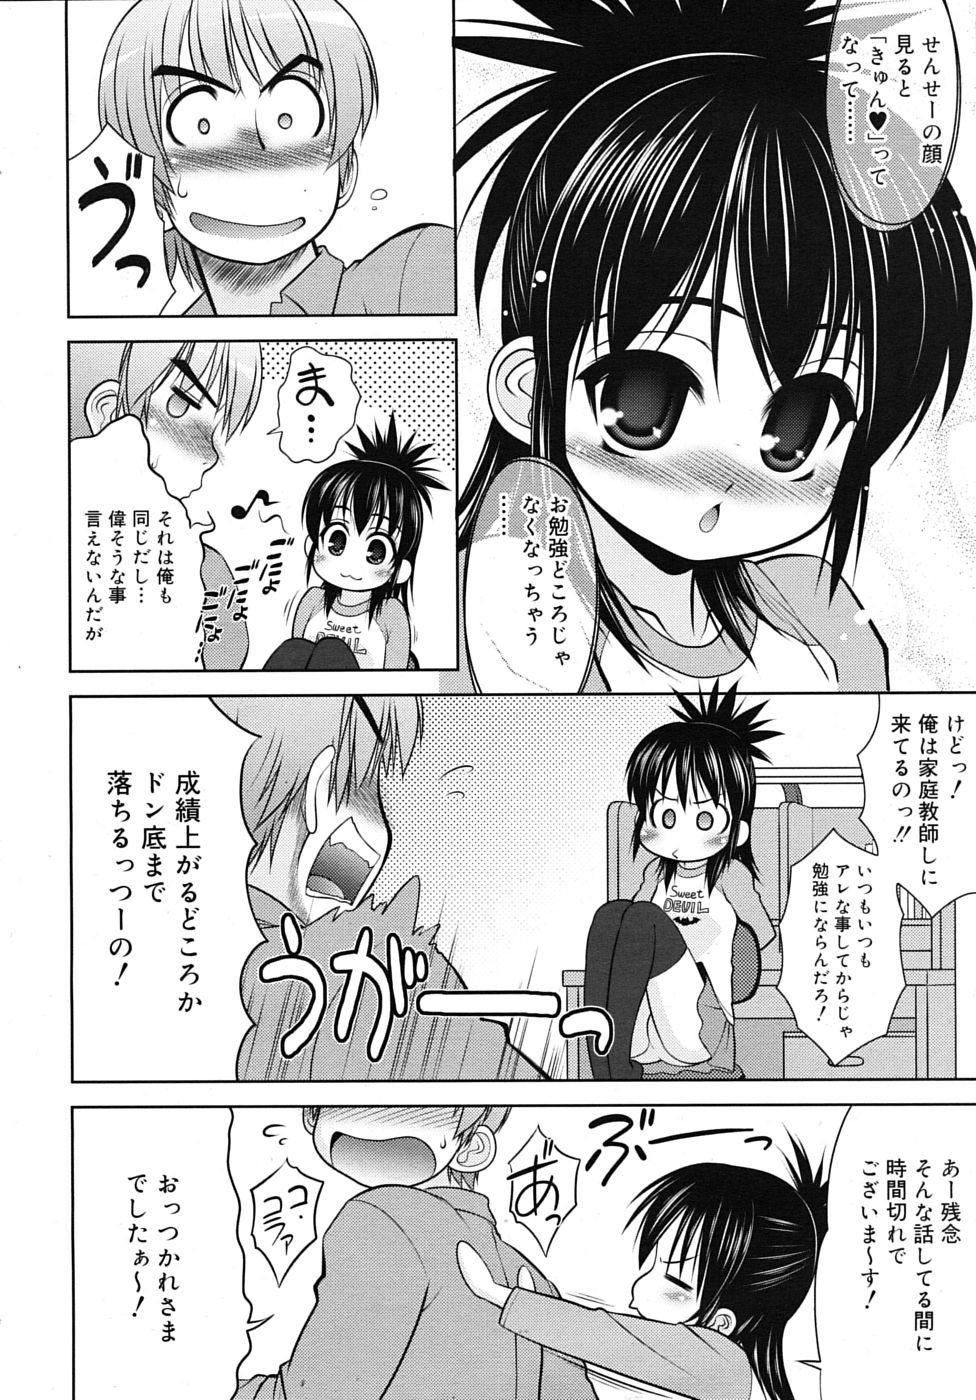 Punish Comic Rin [2009-12] Vol.60 First - Page 12